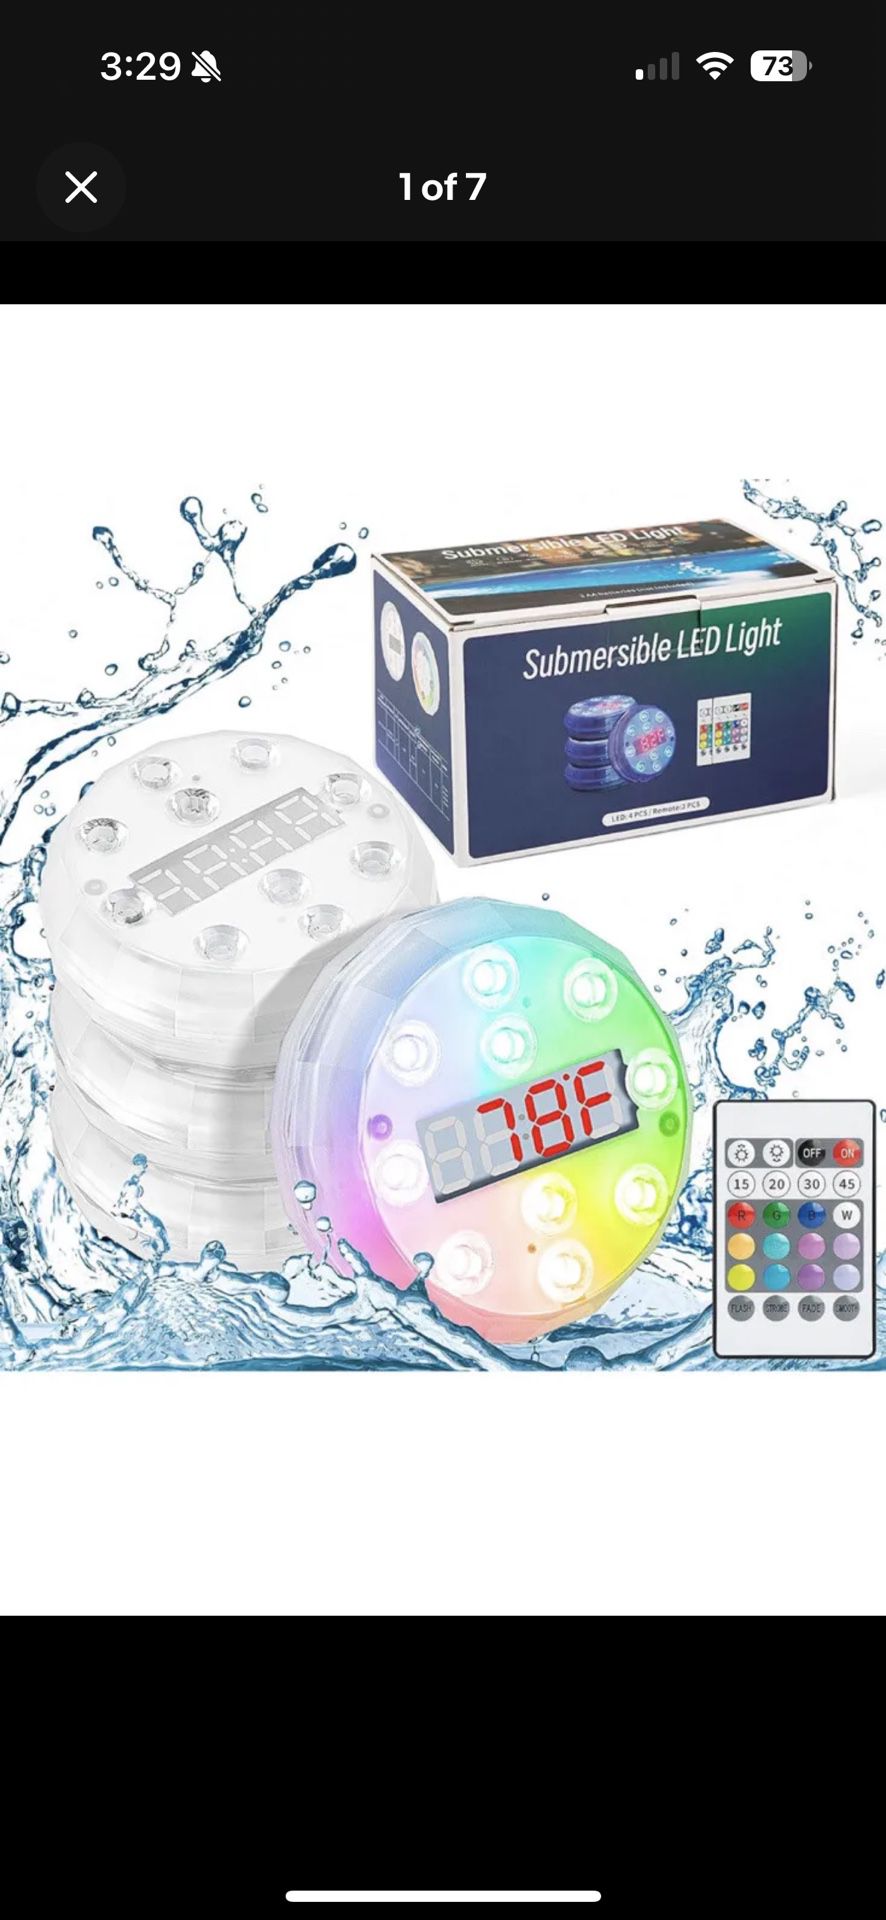 3 RGB LED Submersible Underwater Lights.w/ 2 https://offerup.com/redirect/?o=UmVtb3Rlcy5EaWdpdGFs Temperature Display